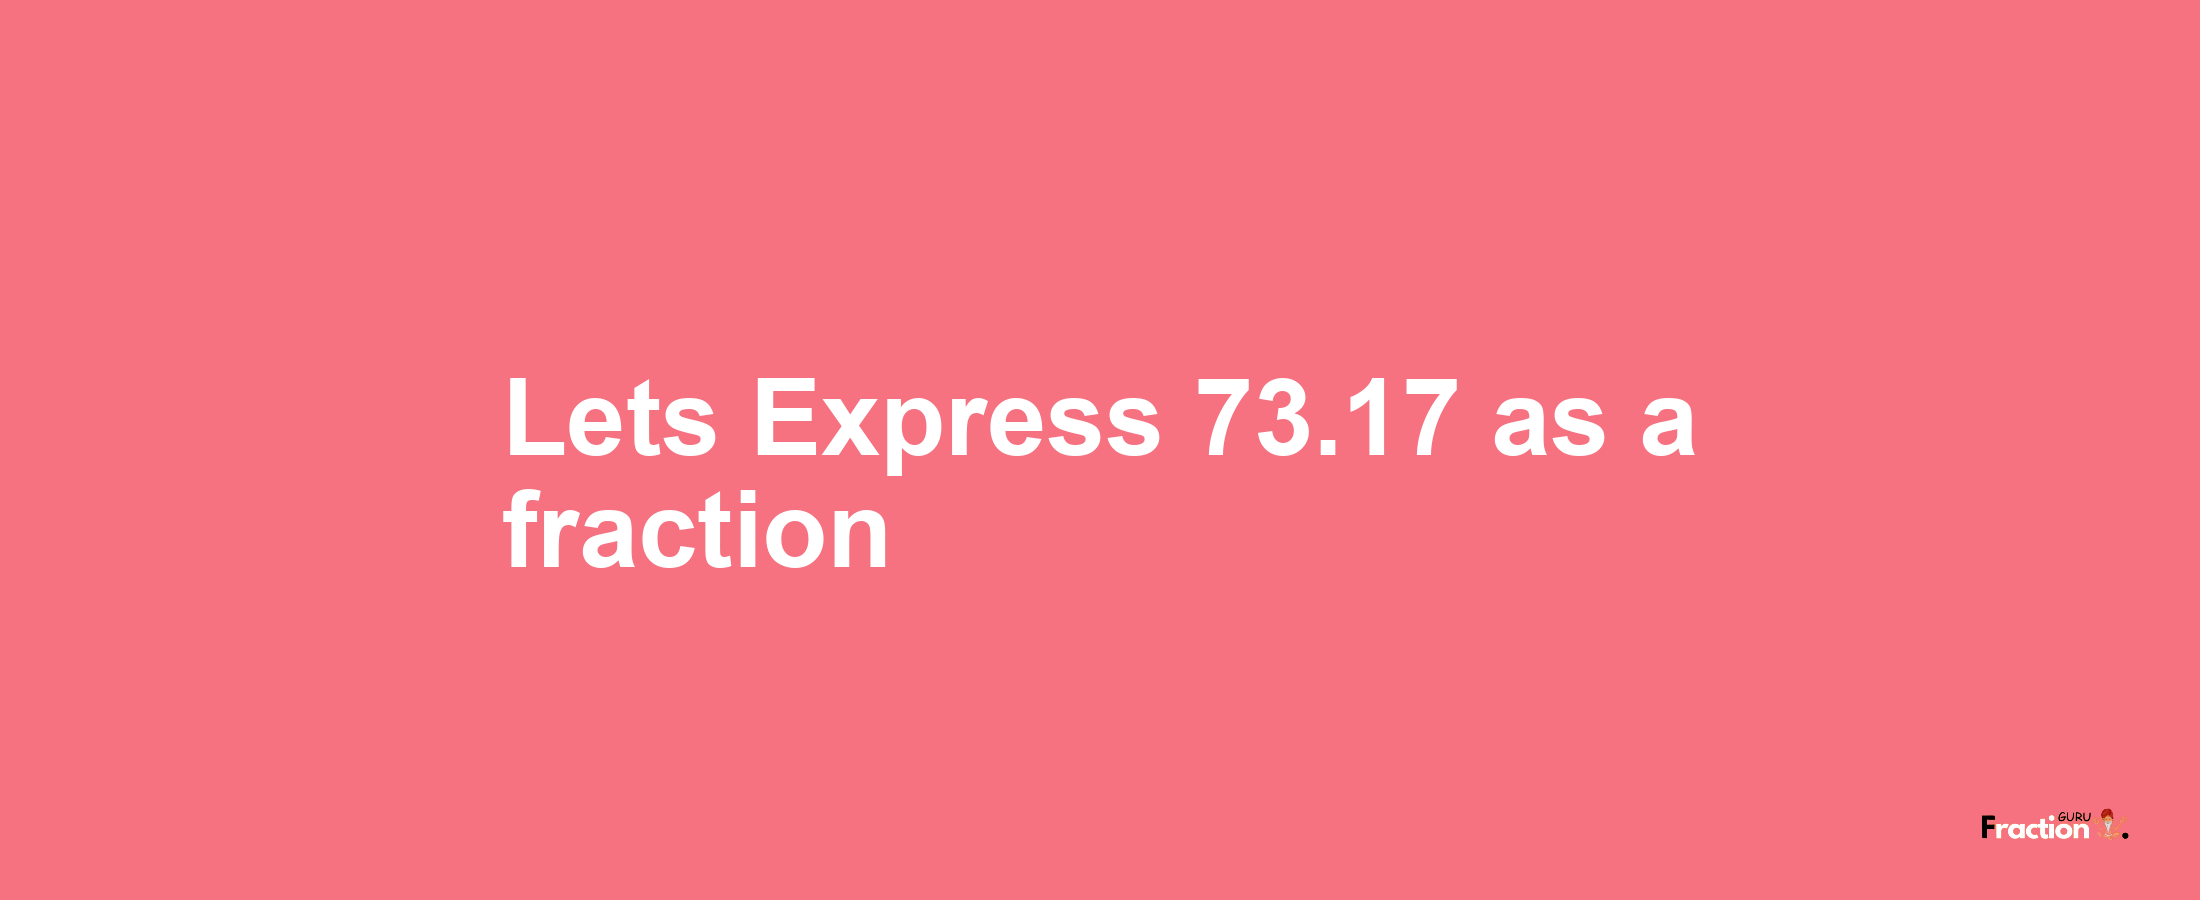 Lets Express 73.17 as afraction